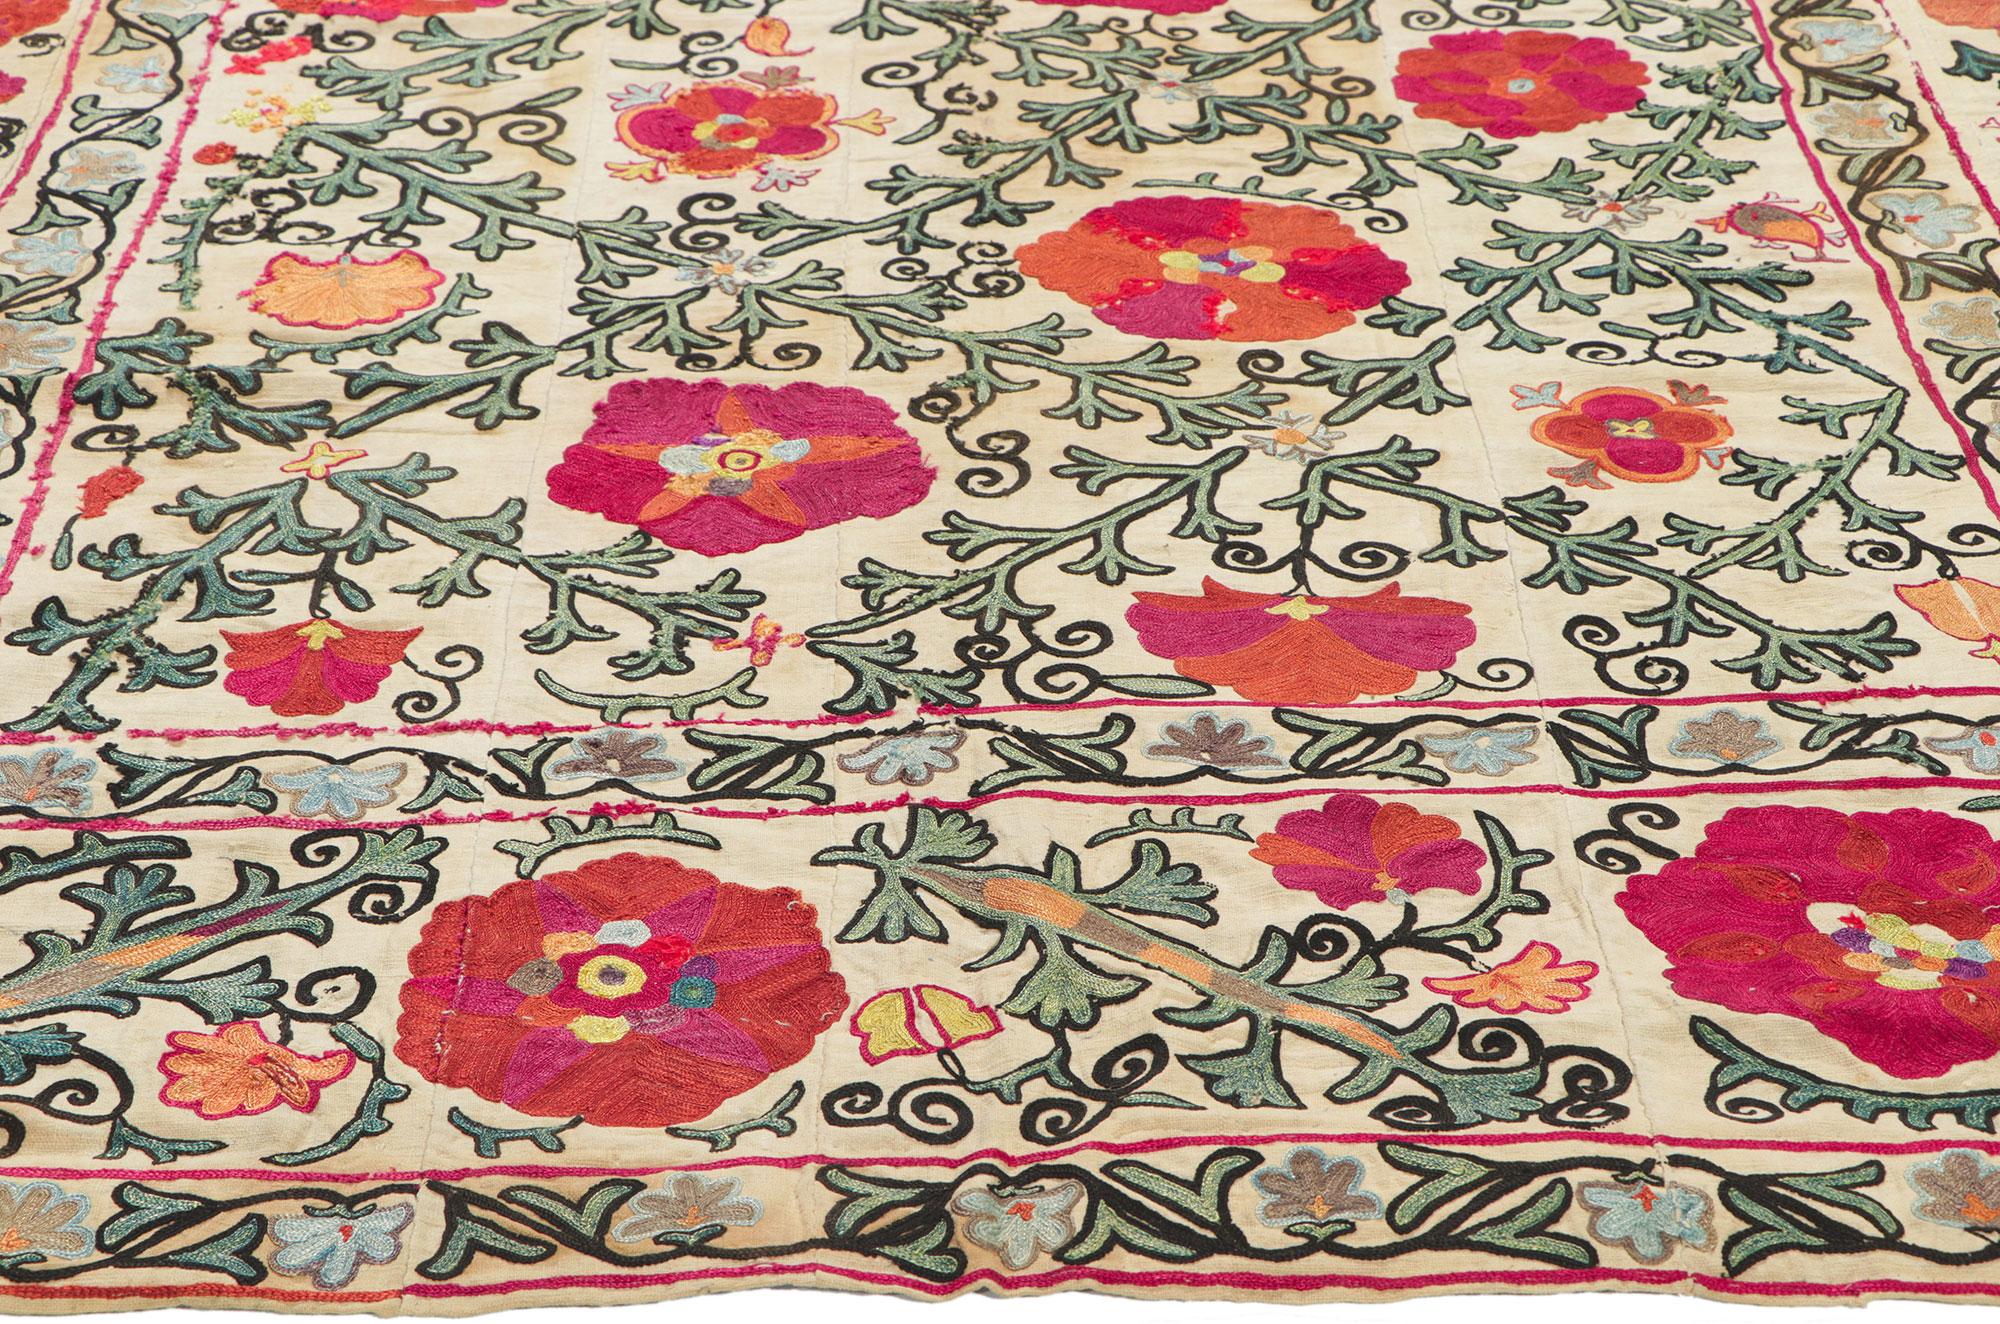 Antique Uzbek Bukhara Suzani Textile, Embroidered Wall Tapestry In Good Condition For Sale In Dallas, TX